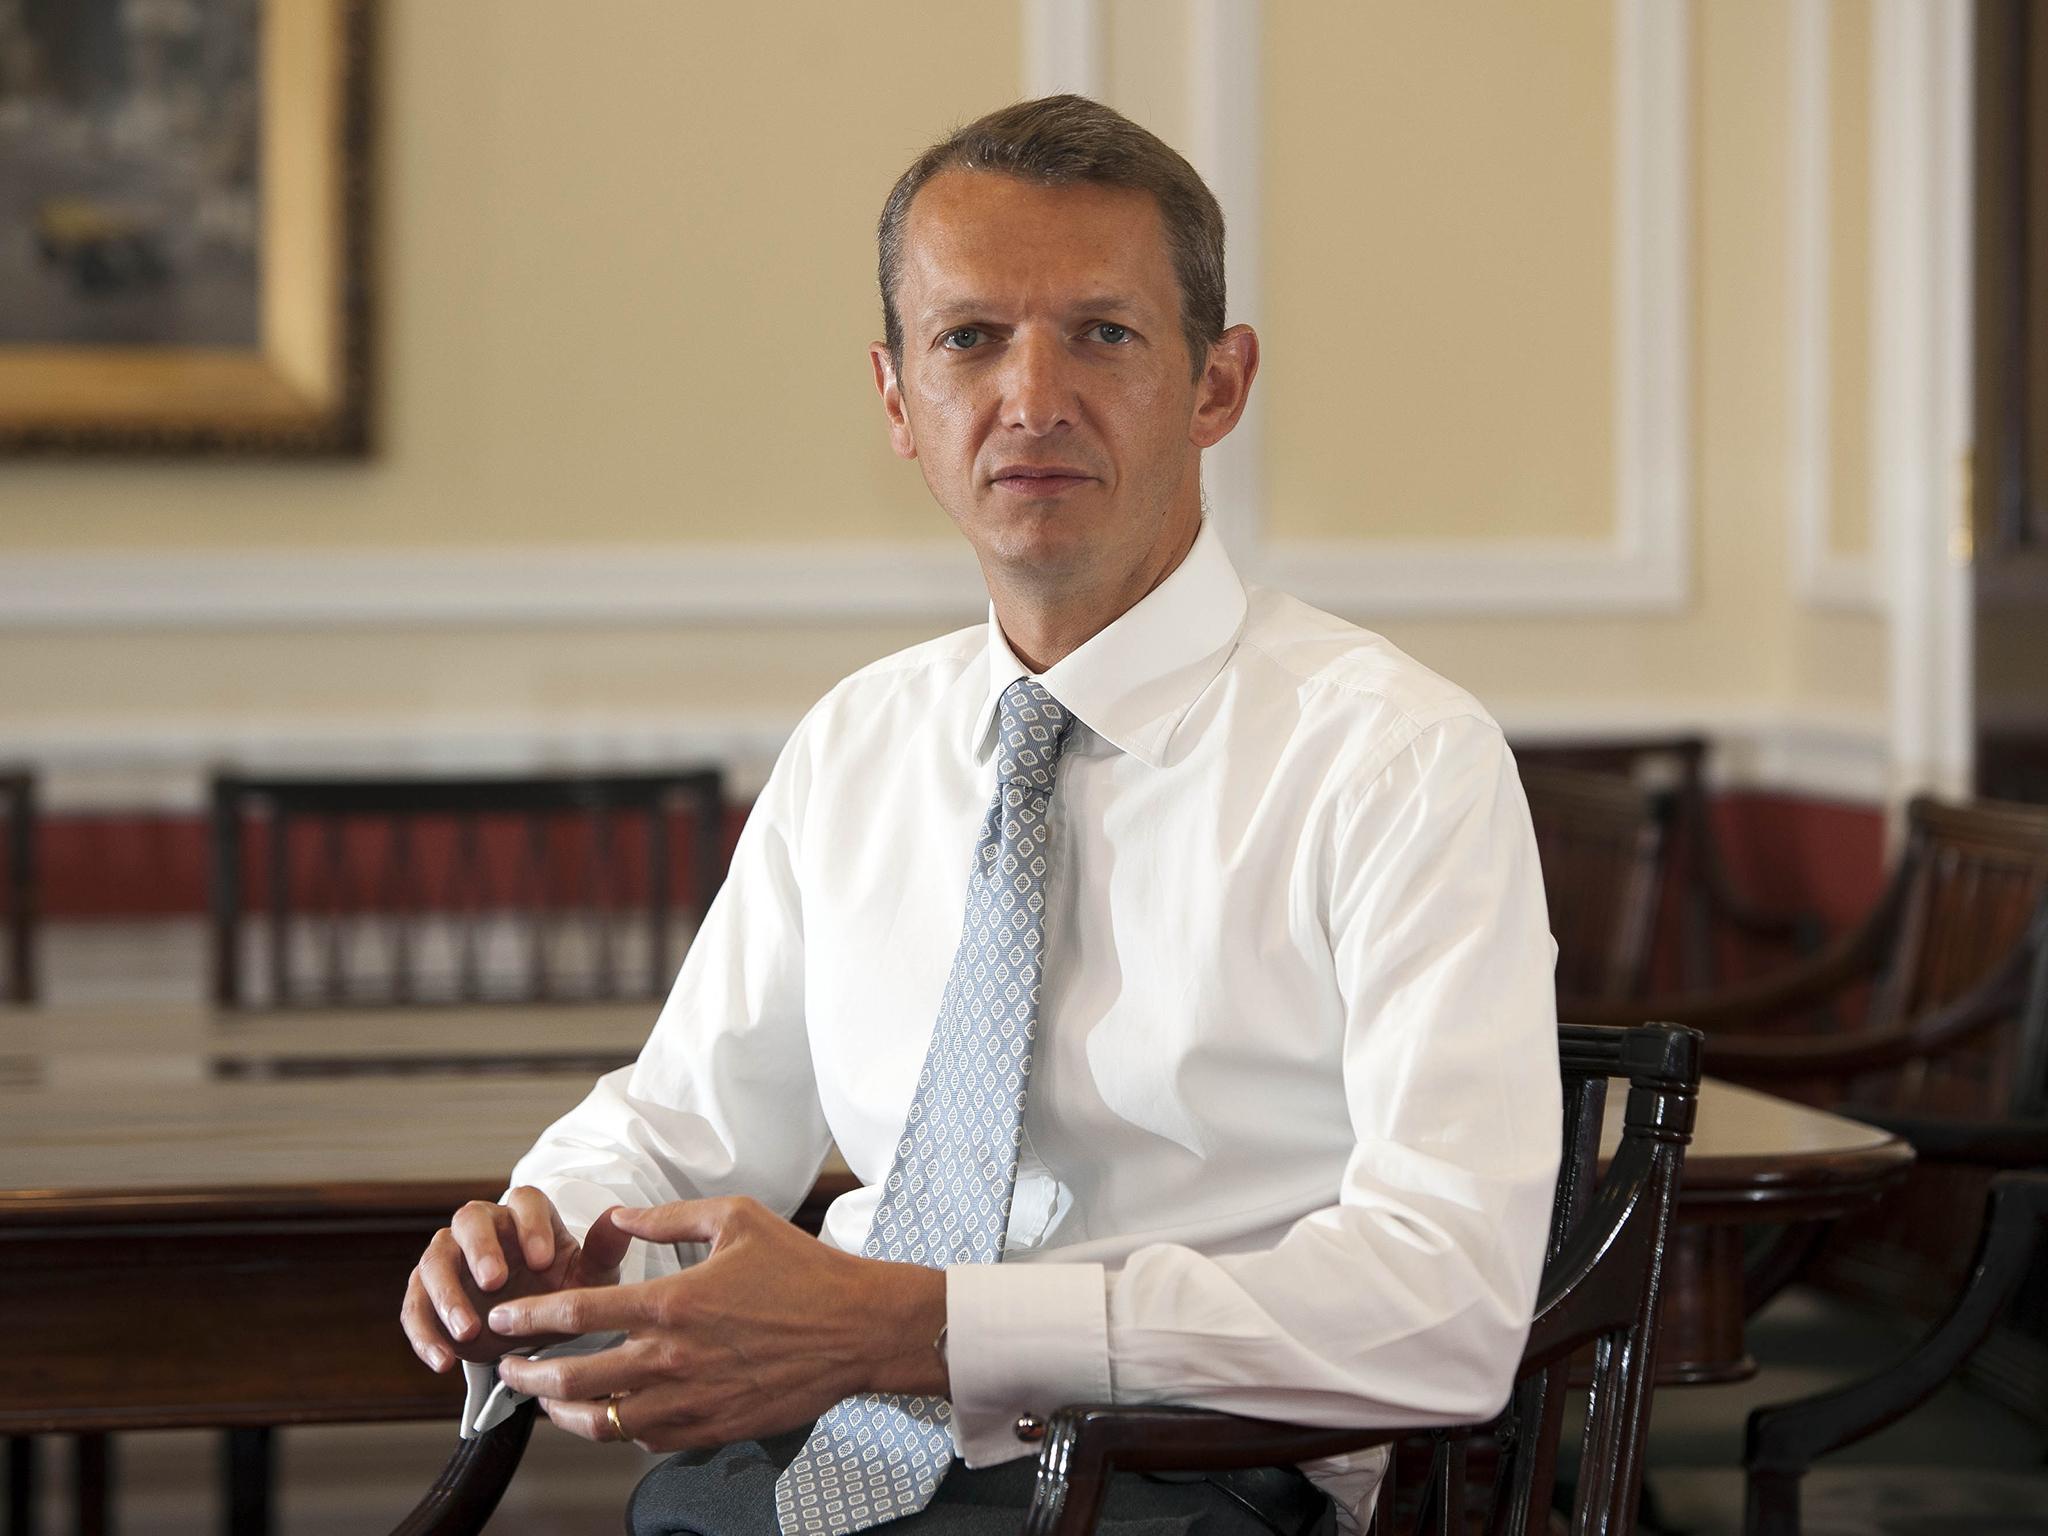 ‘It is early days, but my reading of the evidence is so far, so V,’ says Andy Haldane